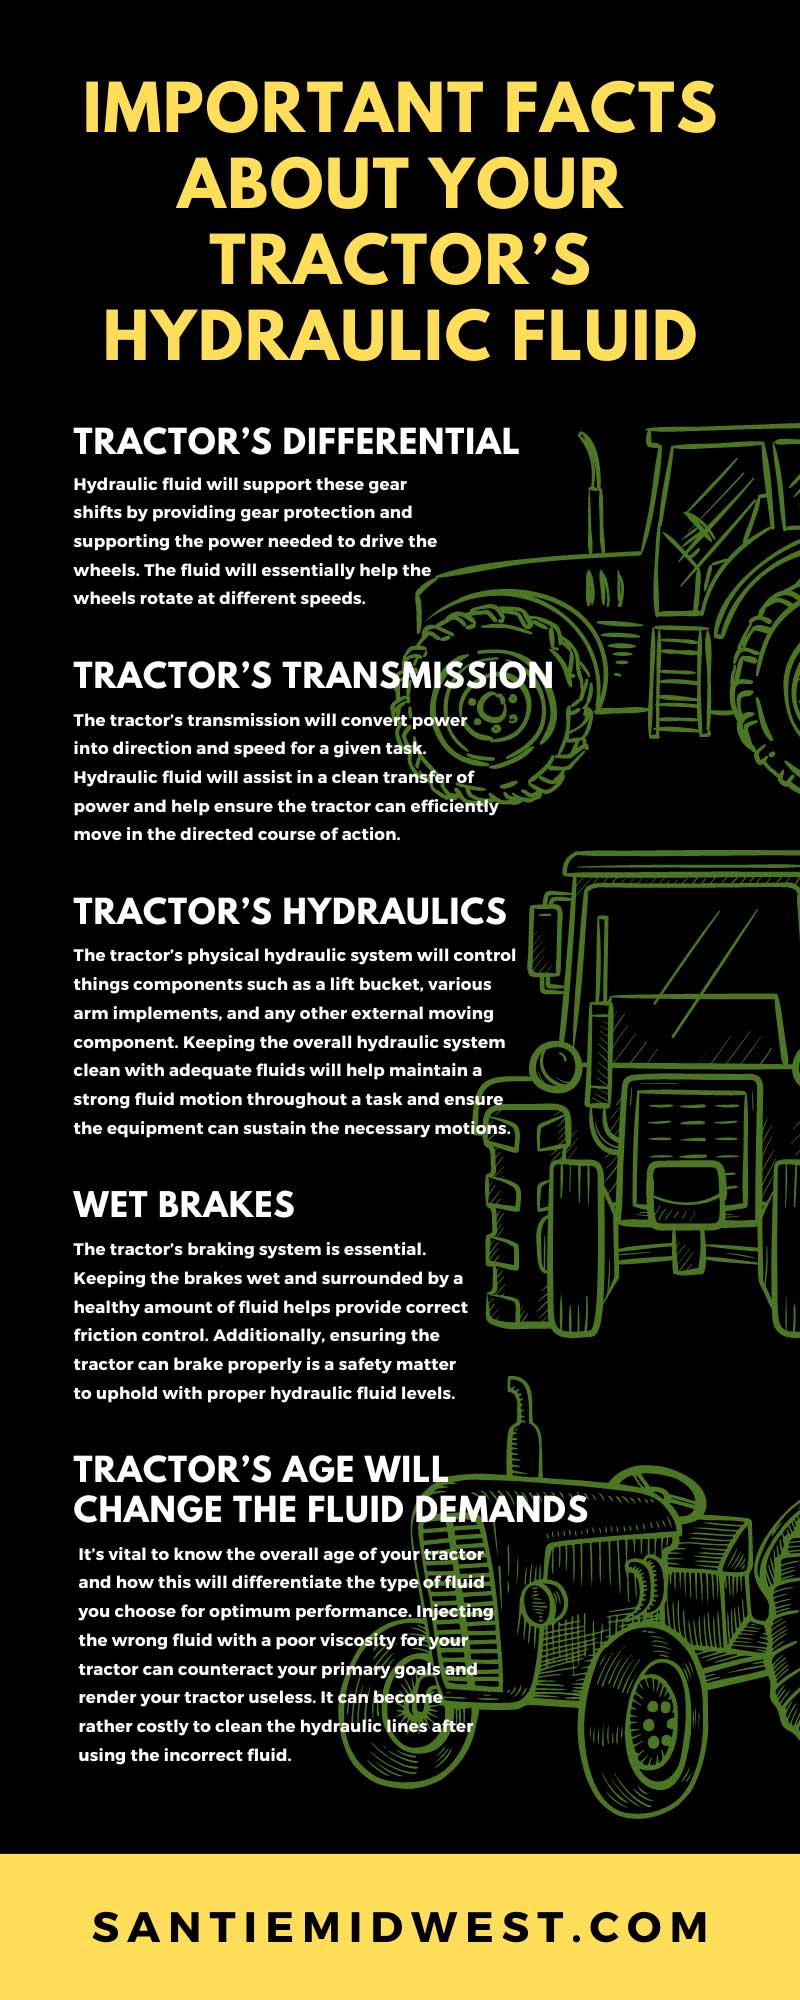 7 Important Facts About Your Tractor’s Hydraulic Fluid